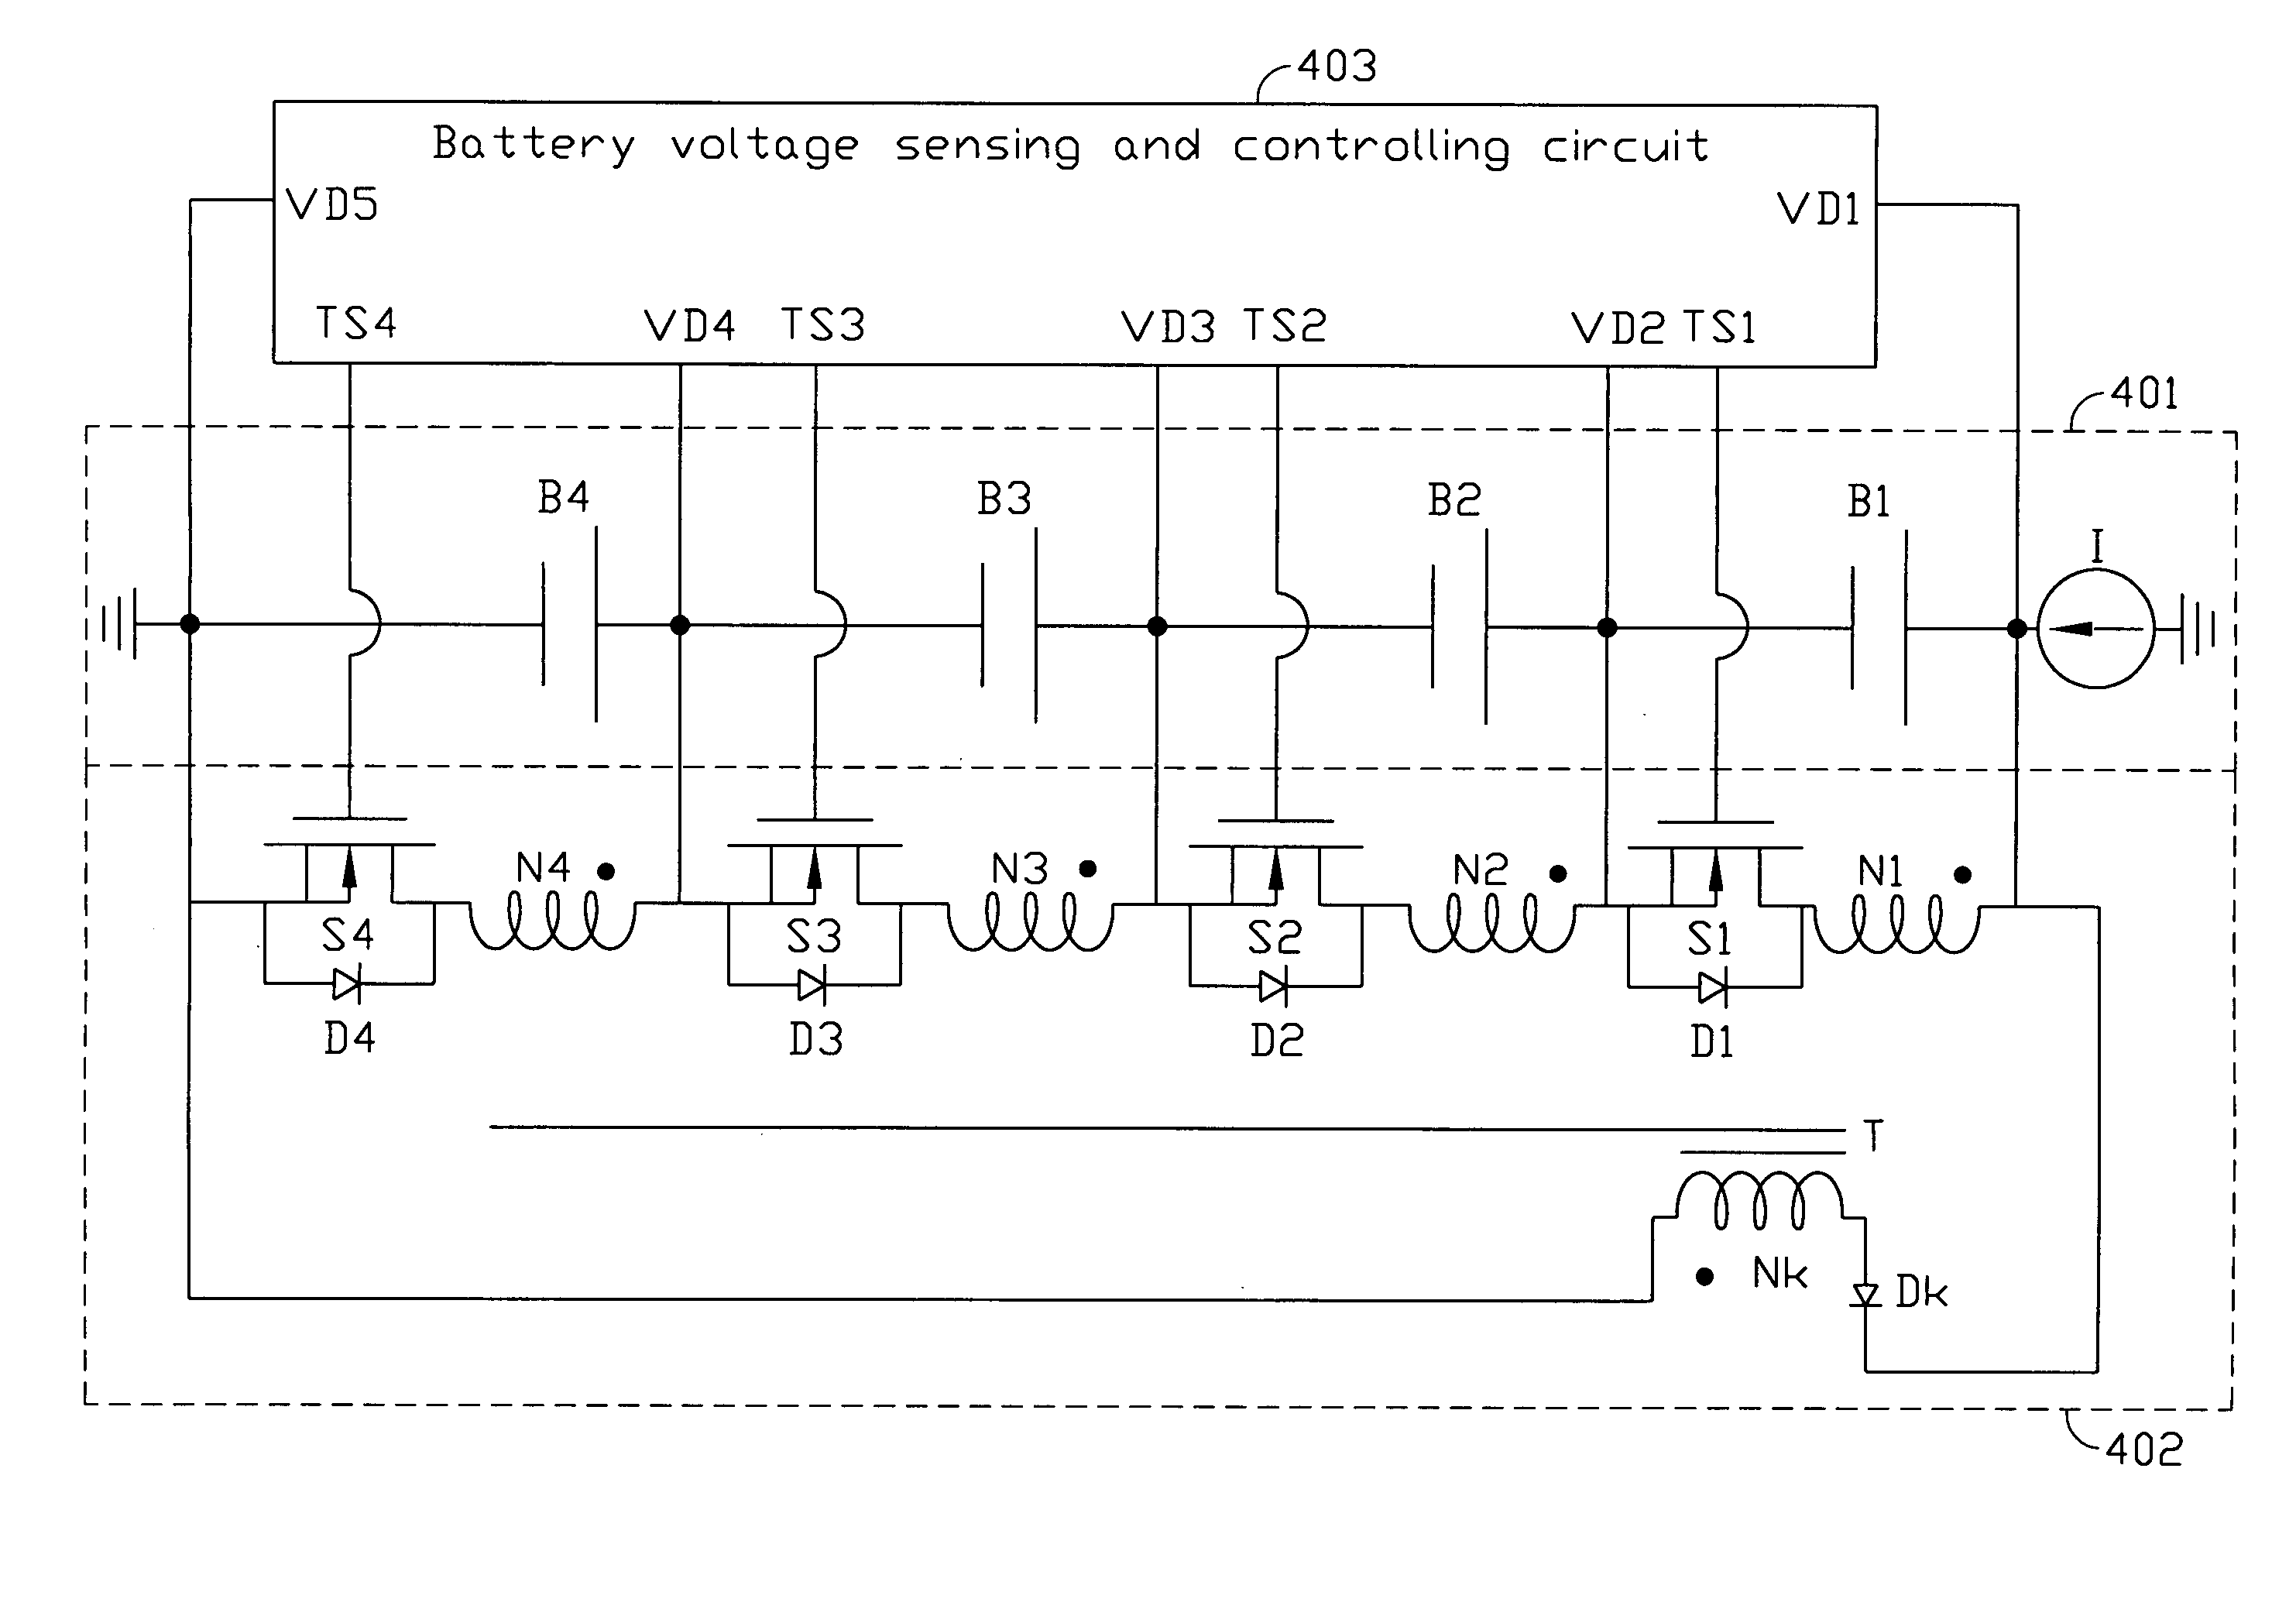 Equalizer for series of connected battery strings